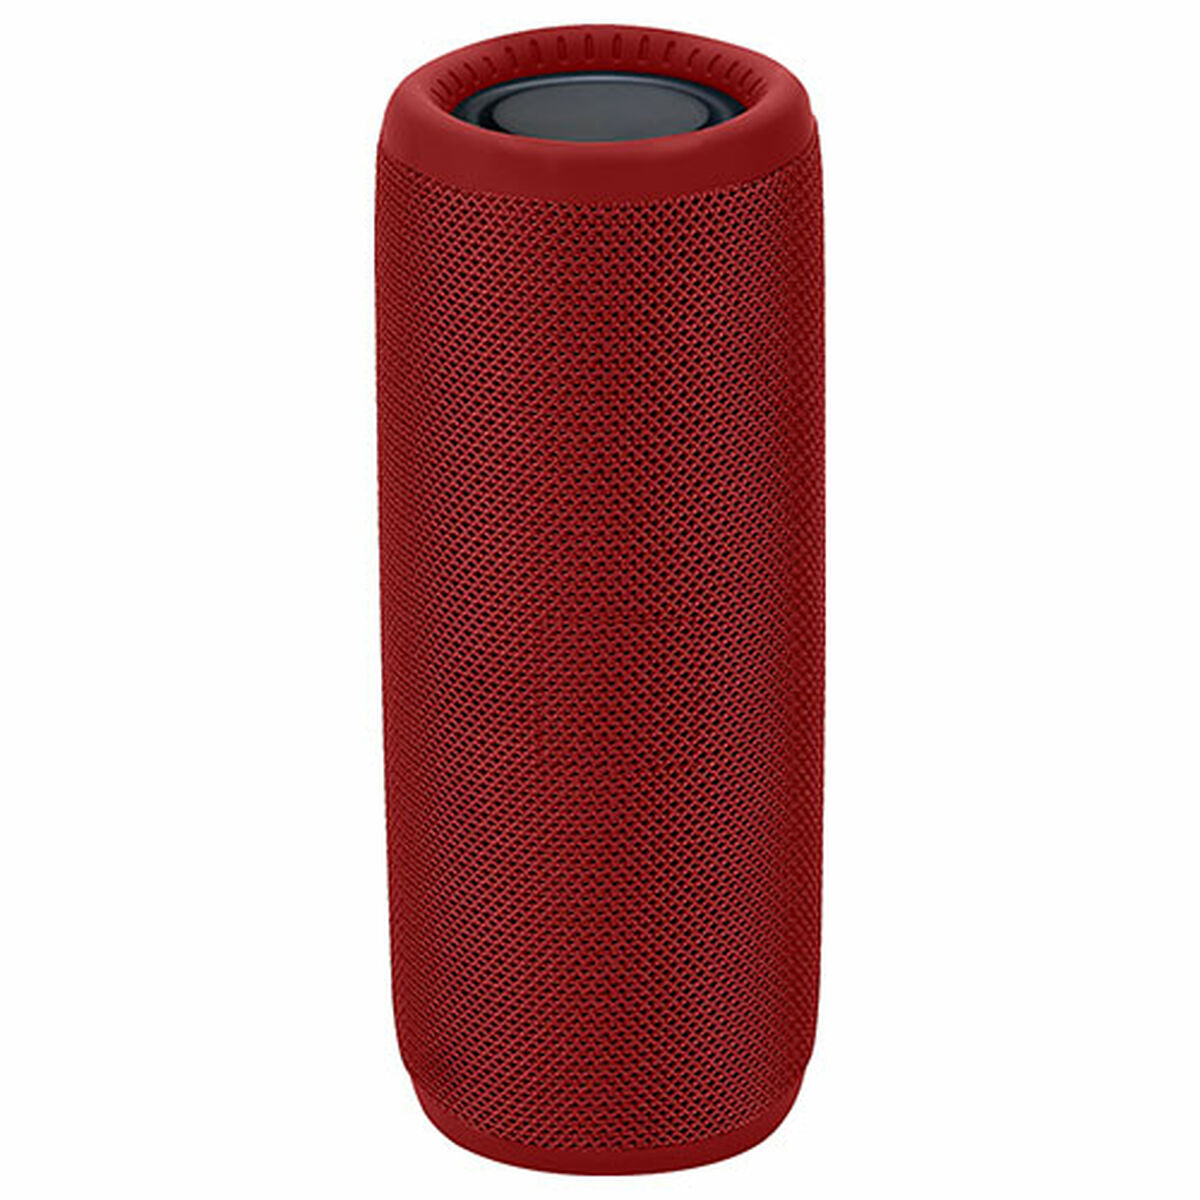 Portable Bluetooth Speakers Denver Electronics, Denver Electronics, Electronics, Mobile communication and accessories, portable-bluetooth-speakers-denver-electronics-4, Brand_Denver Electronics, category-reference-2609, category-reference-2882, category-reference-2923, category-reference-t-19653, category-reference-t-21311, category-reference-t-25527, category-reference-t-4036, category-reference-t-4037, Condition_NEW, entertainment, music, Price_20 - 50, telephones & tablets, wifi y bluetooth, RiotNook